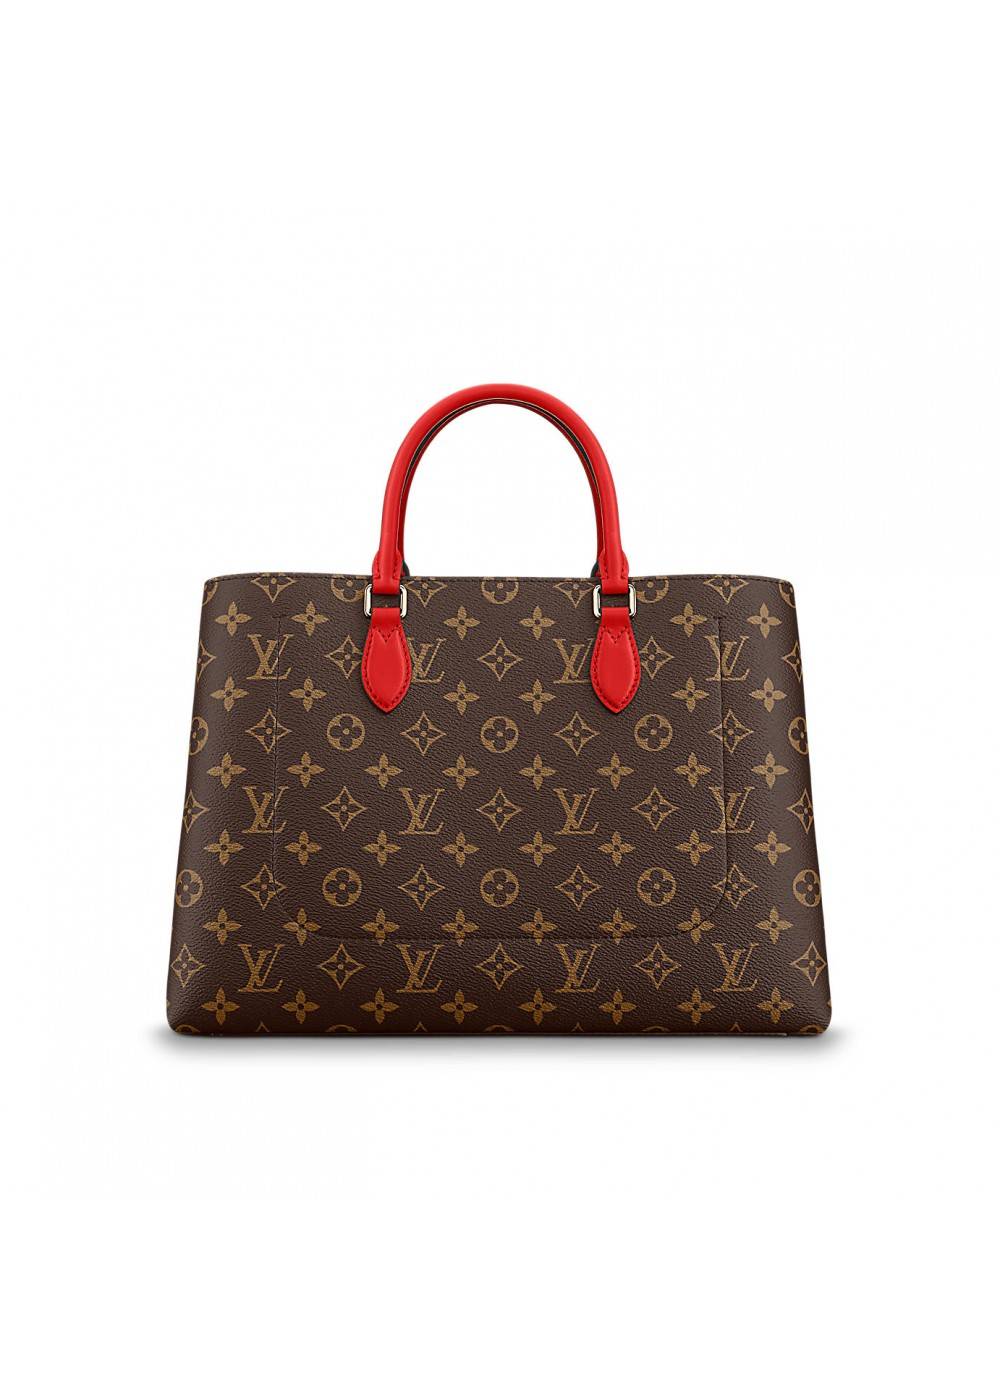 LOUIS VUITTON FLOWER TOTE Red